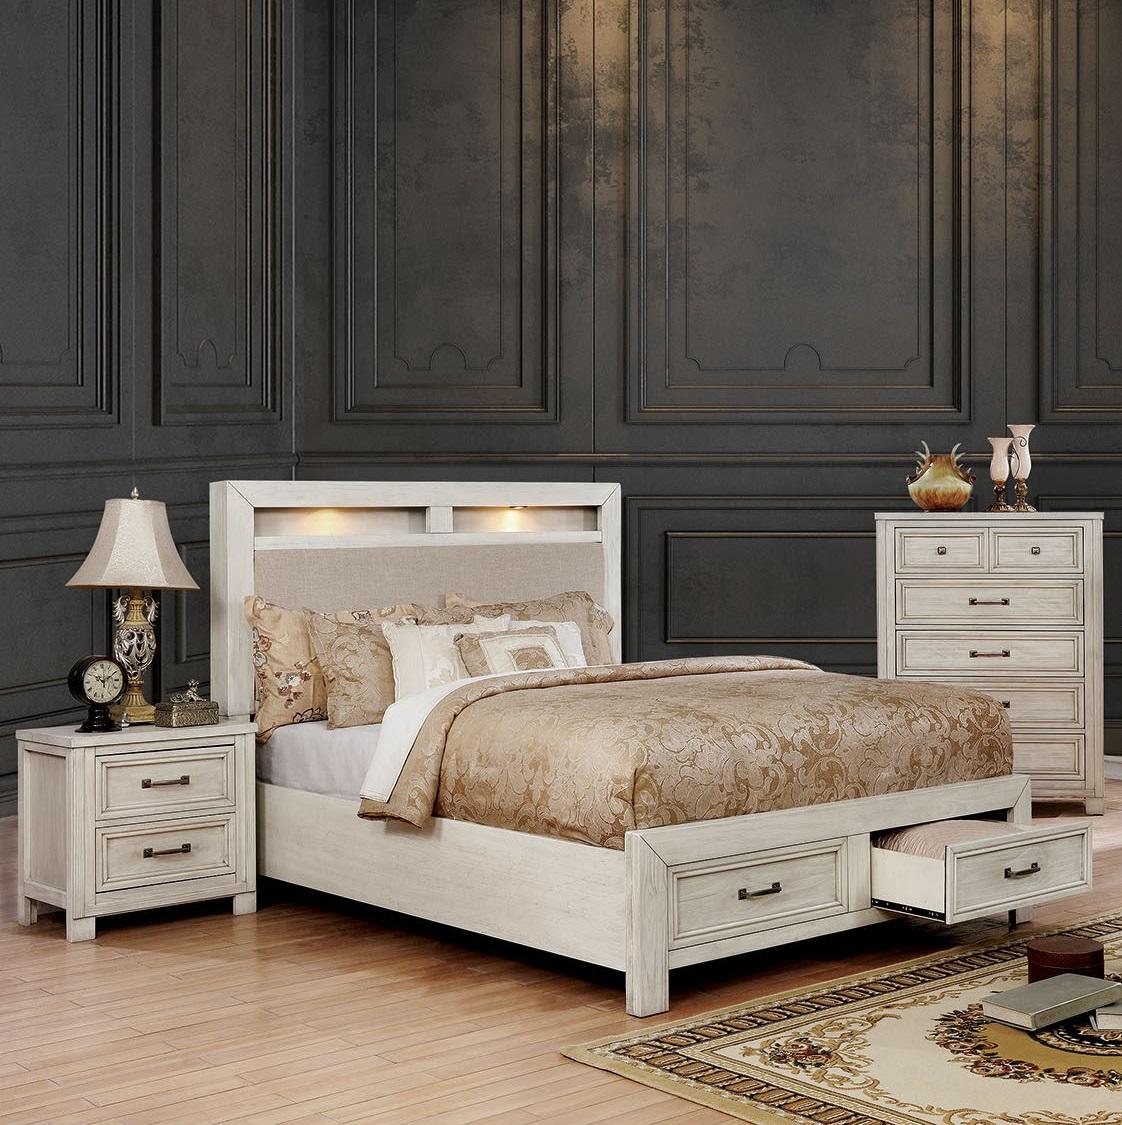 Transitional Storage Bedroom Set CM7365WH-CK-3PC Tywyn CM7365WH-CK-3PC in Antique White Fabric